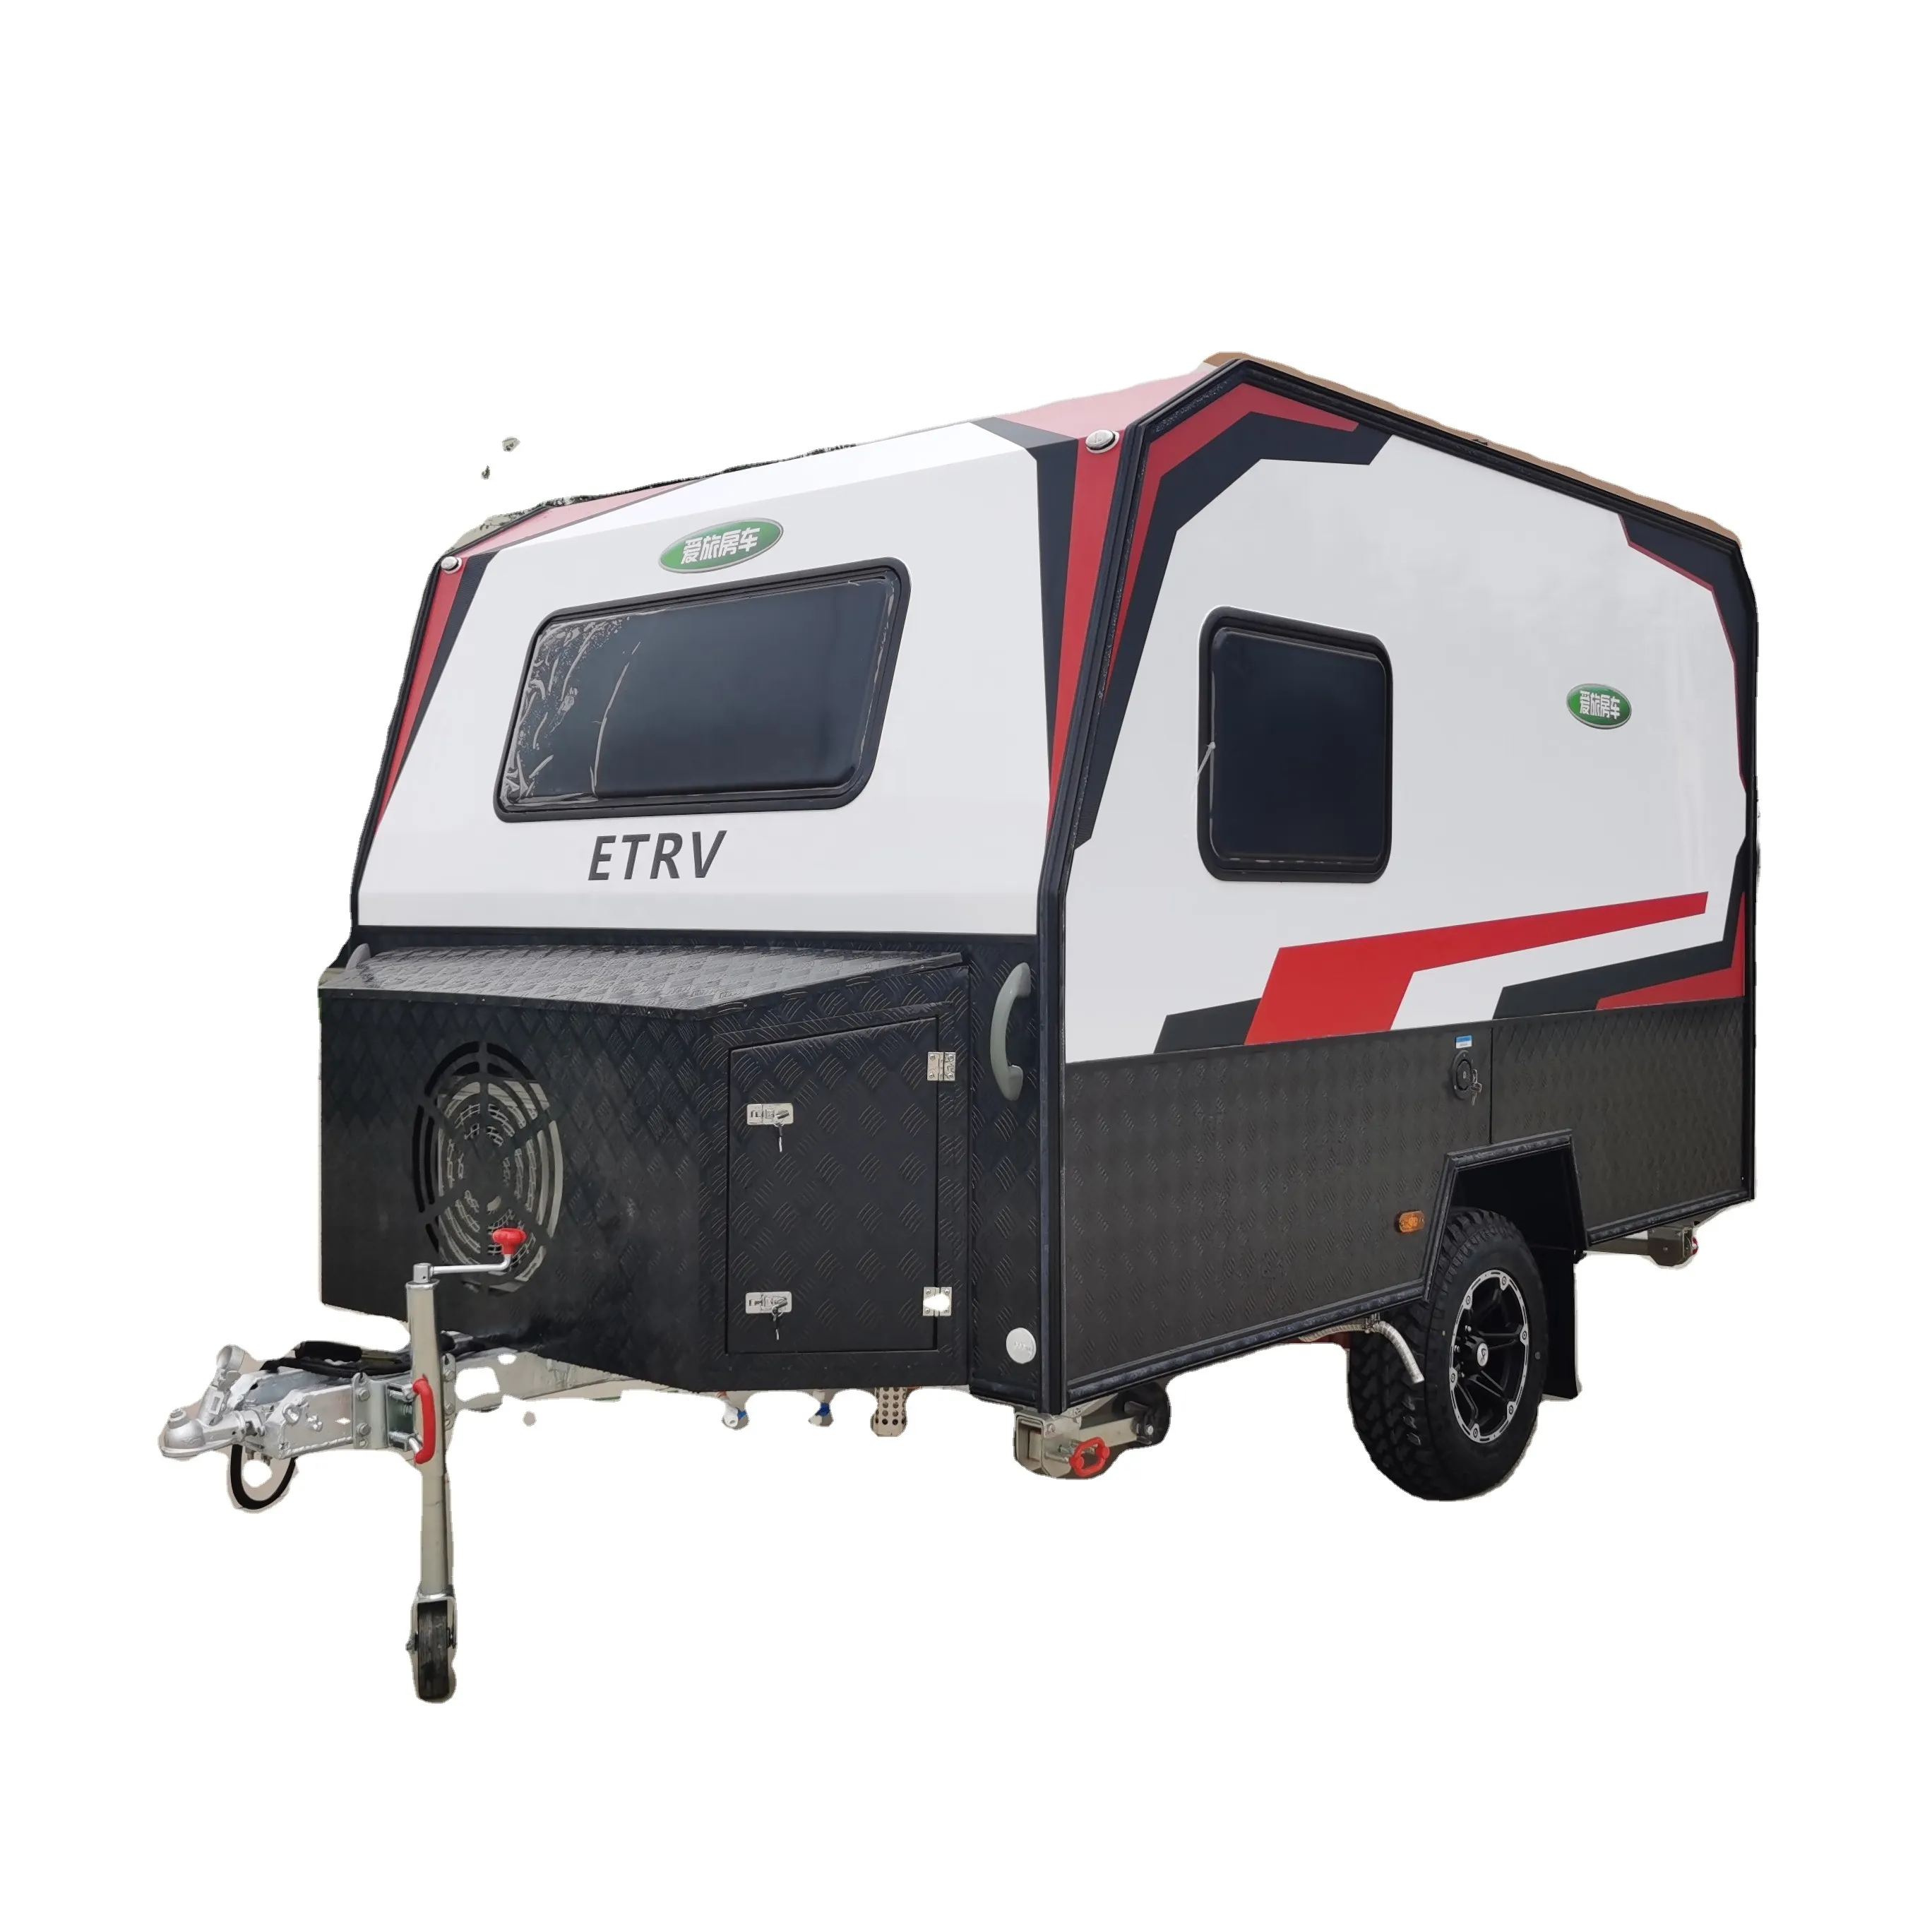 Modern Simplicity Two-way Ventilation Skylight in Toilet Mobile Camping Rv Trailer Off Road Travel Trailer LT215/75R15 1350 50mm